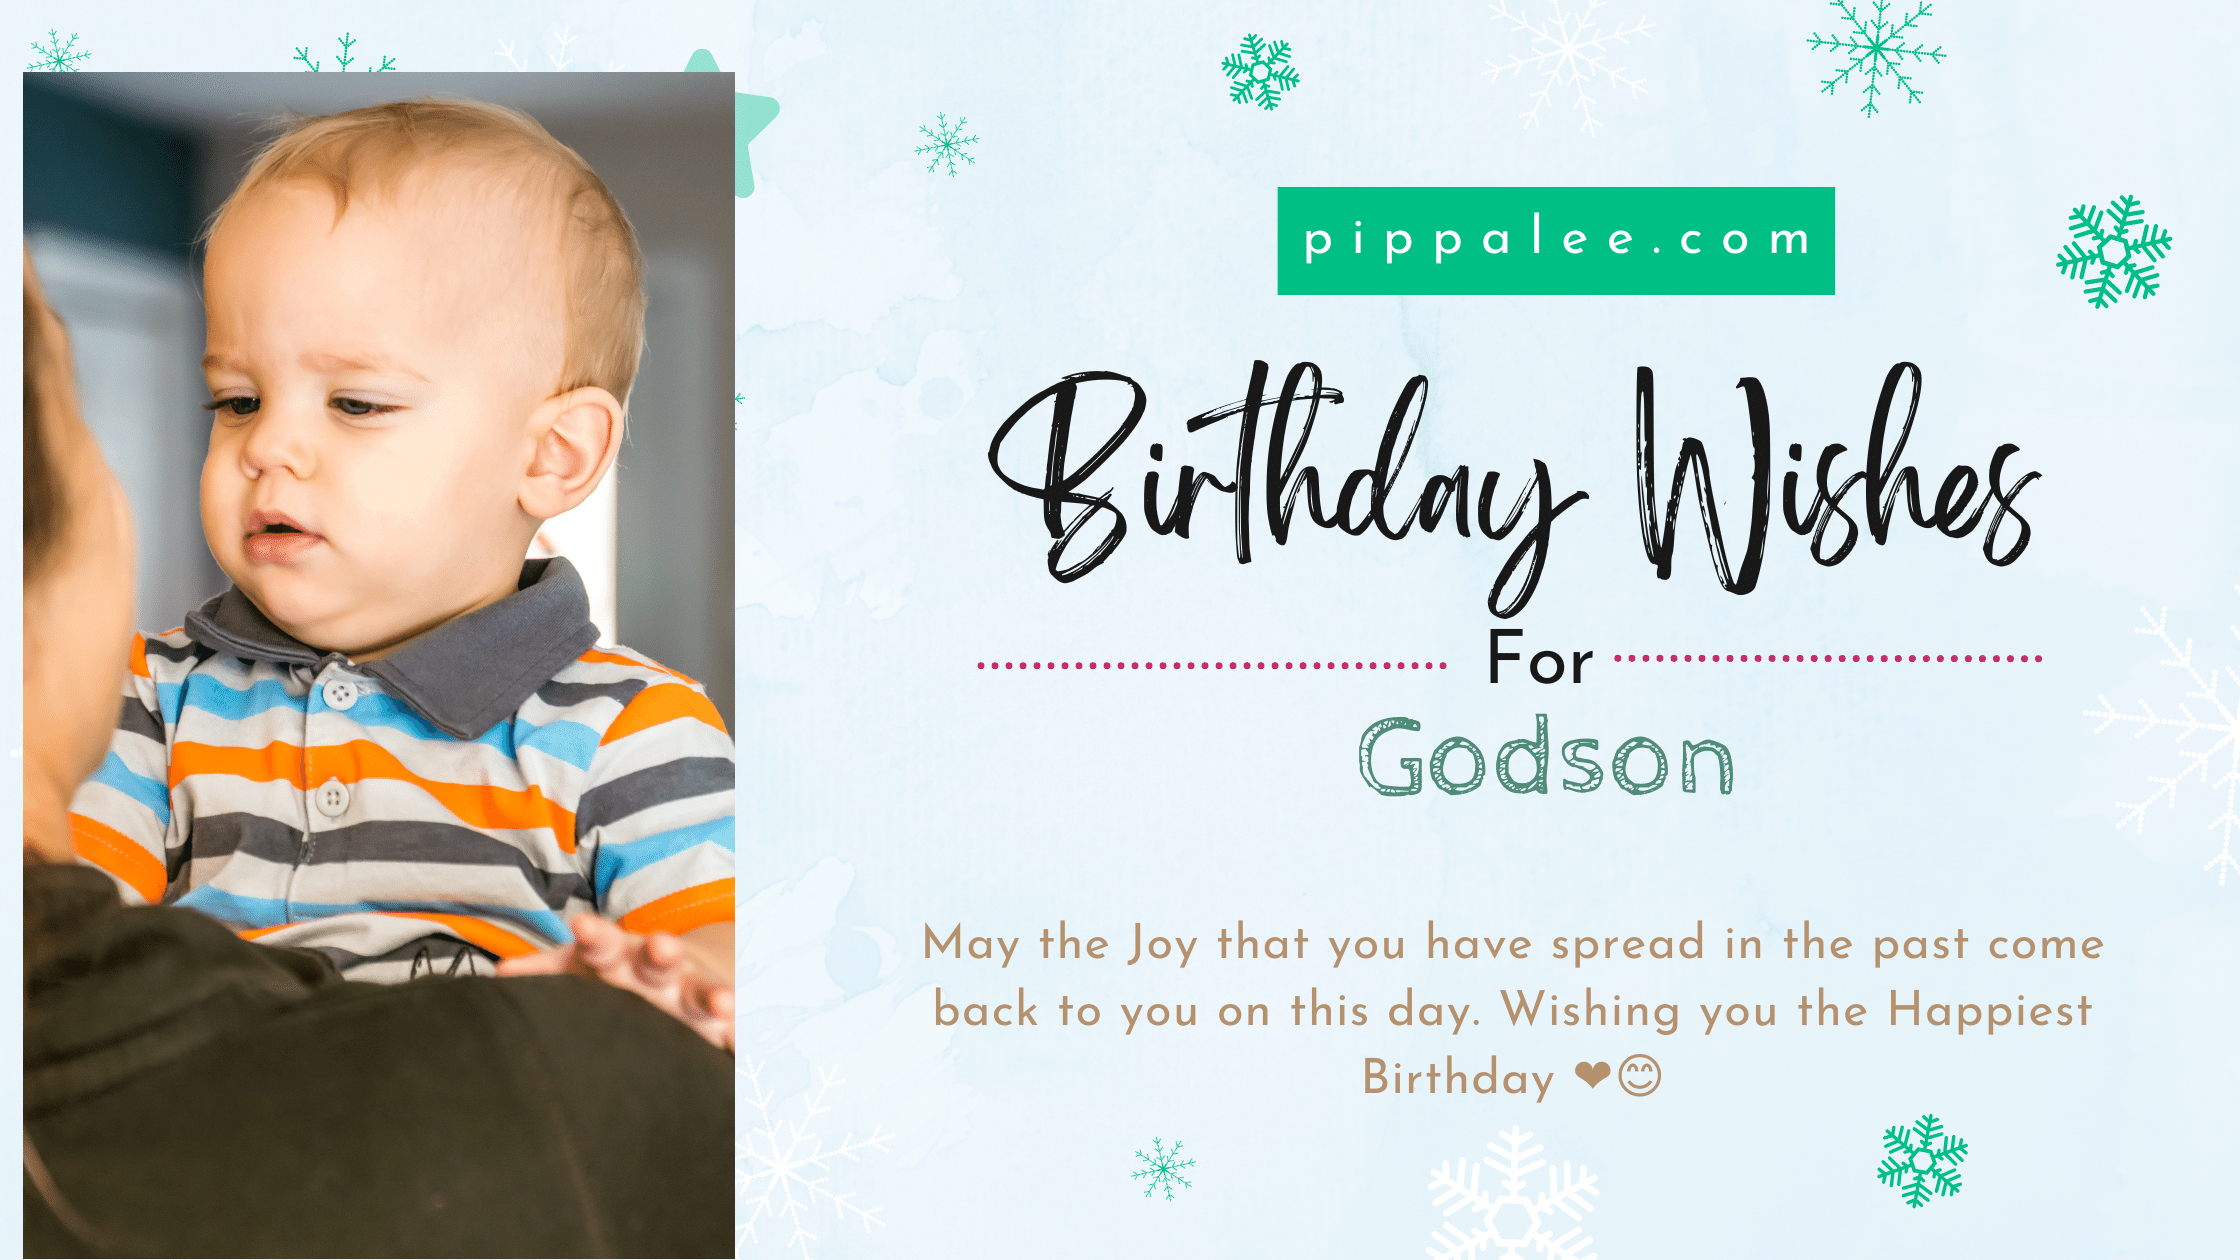 Happy Birthday for Godson - Wishes & Messages